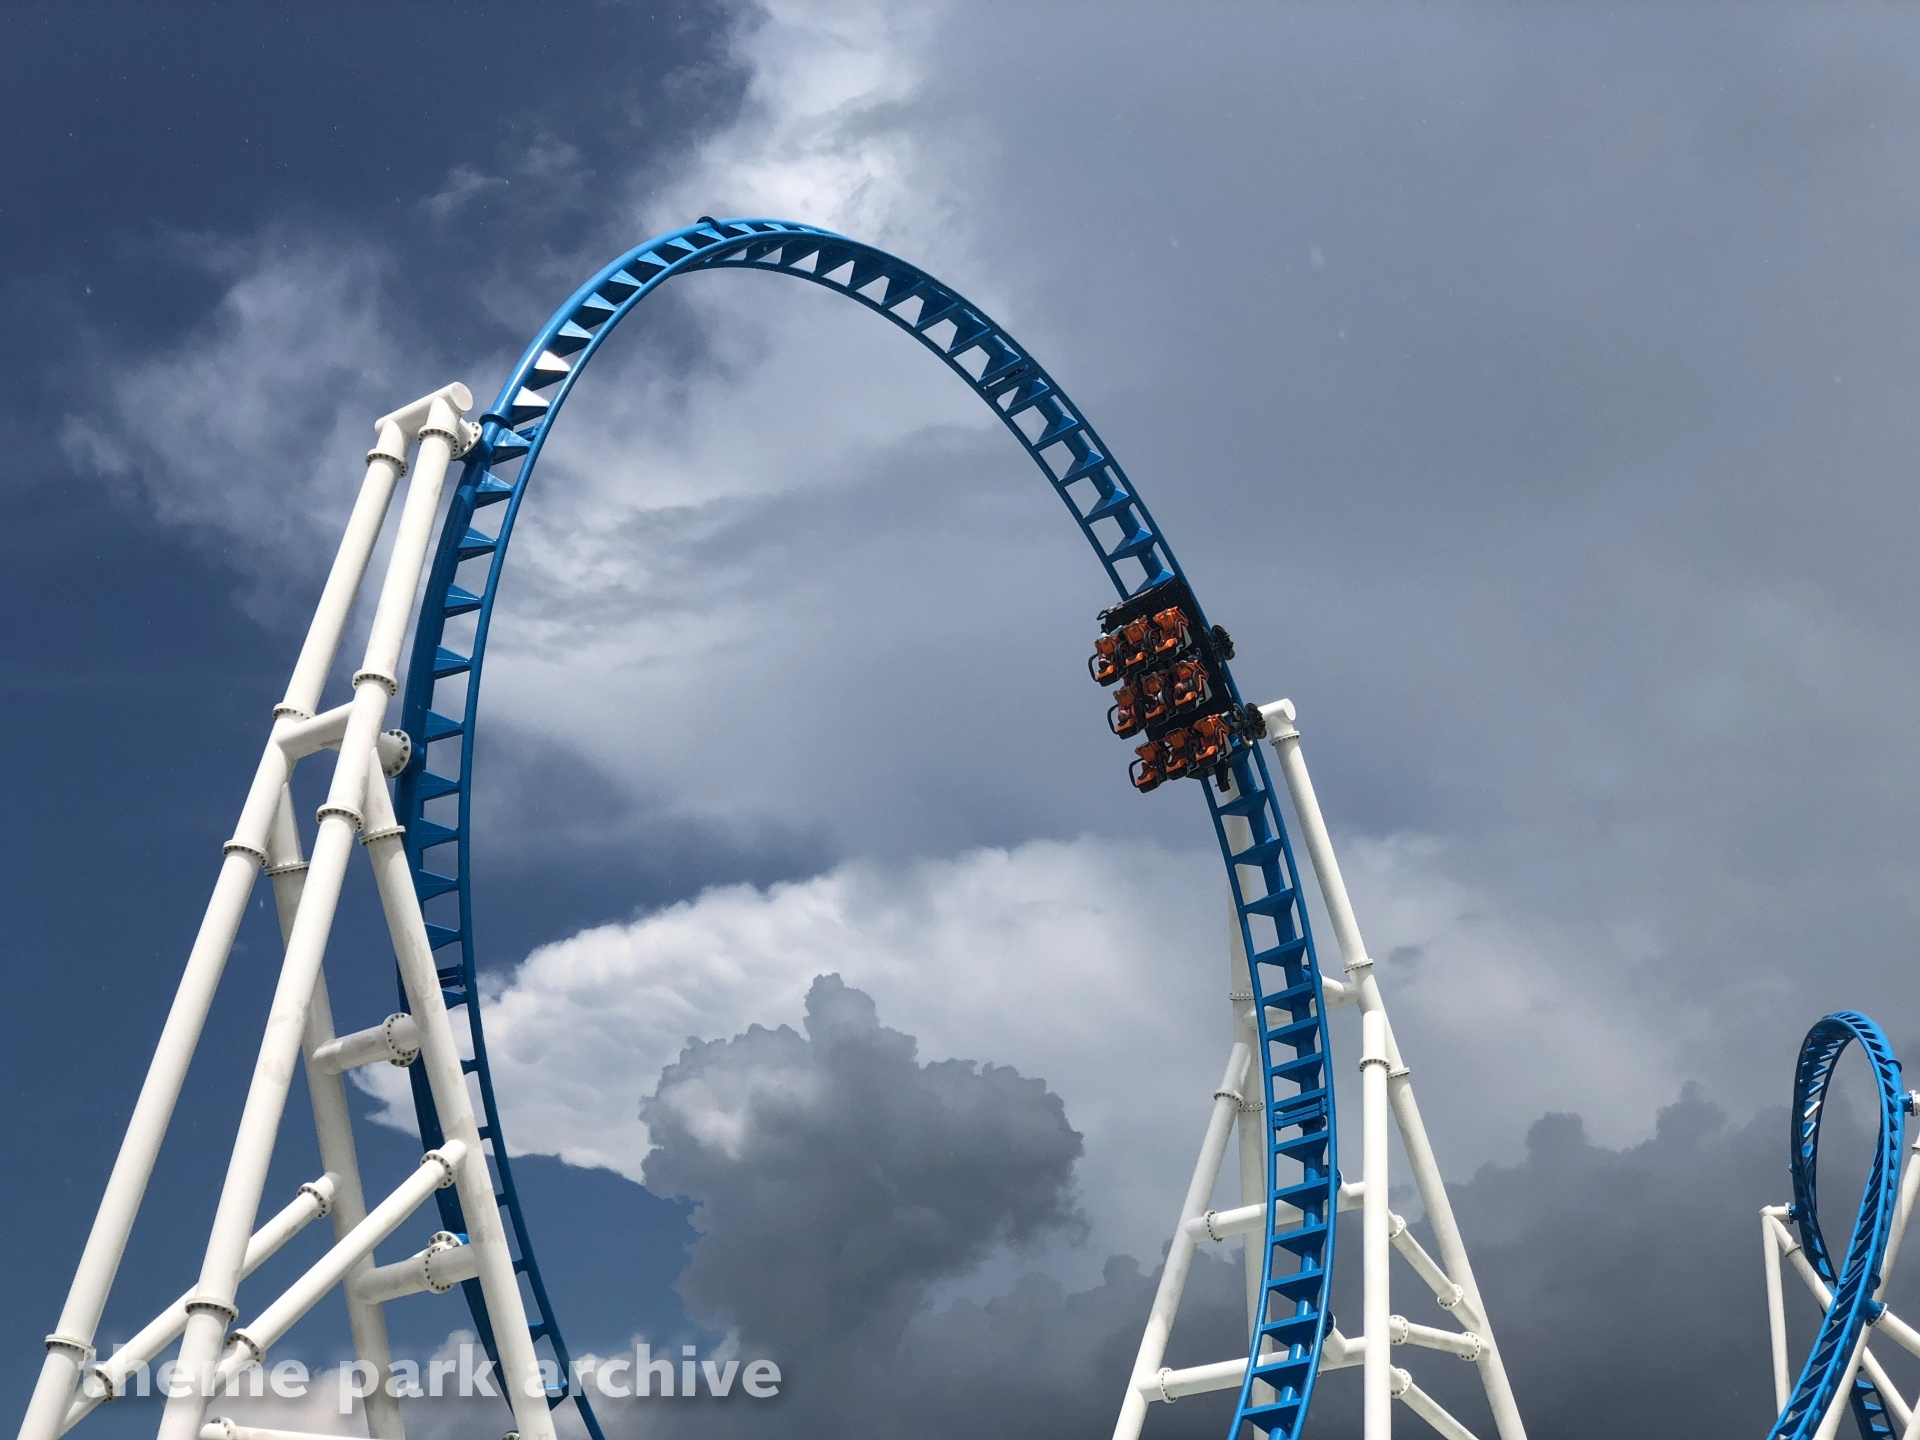 Rollin Thunder at The Park At OWA | Theme Park Archive